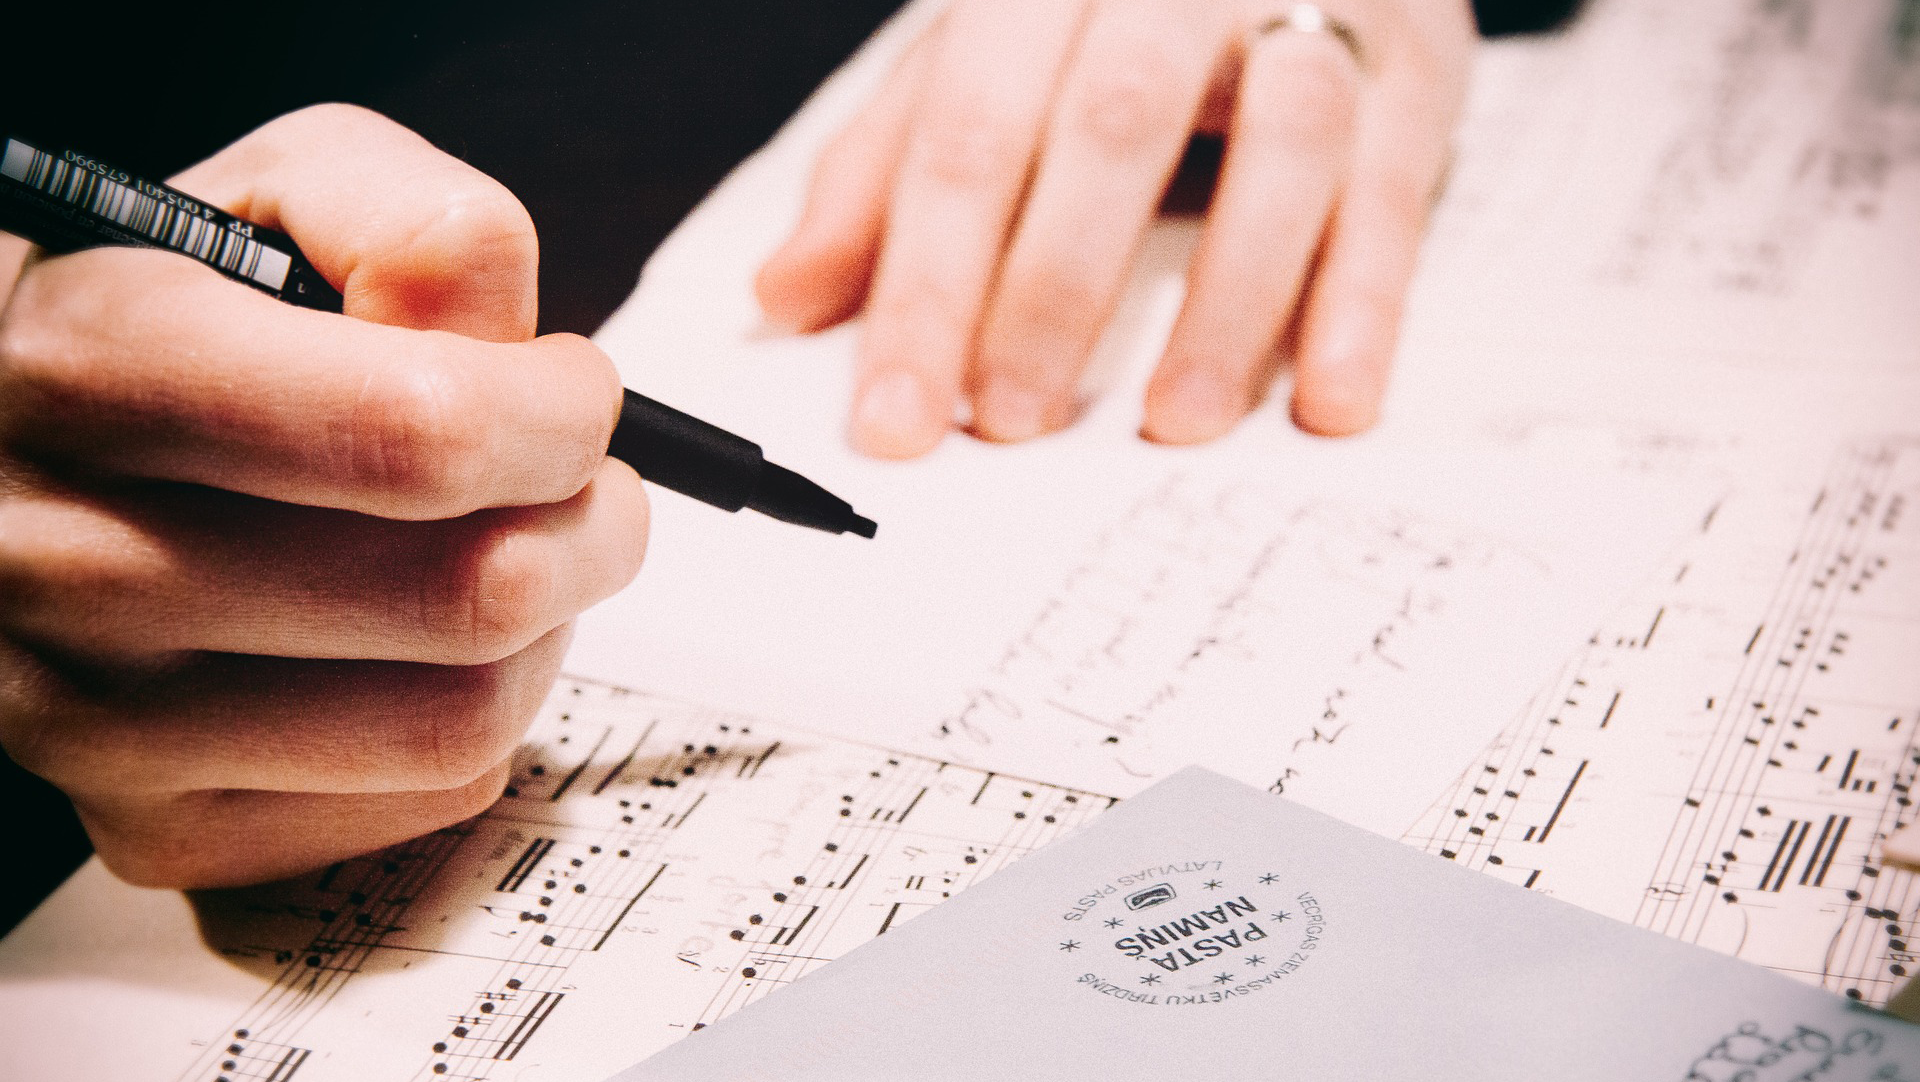 Memorization Tips for Learning Choral Music